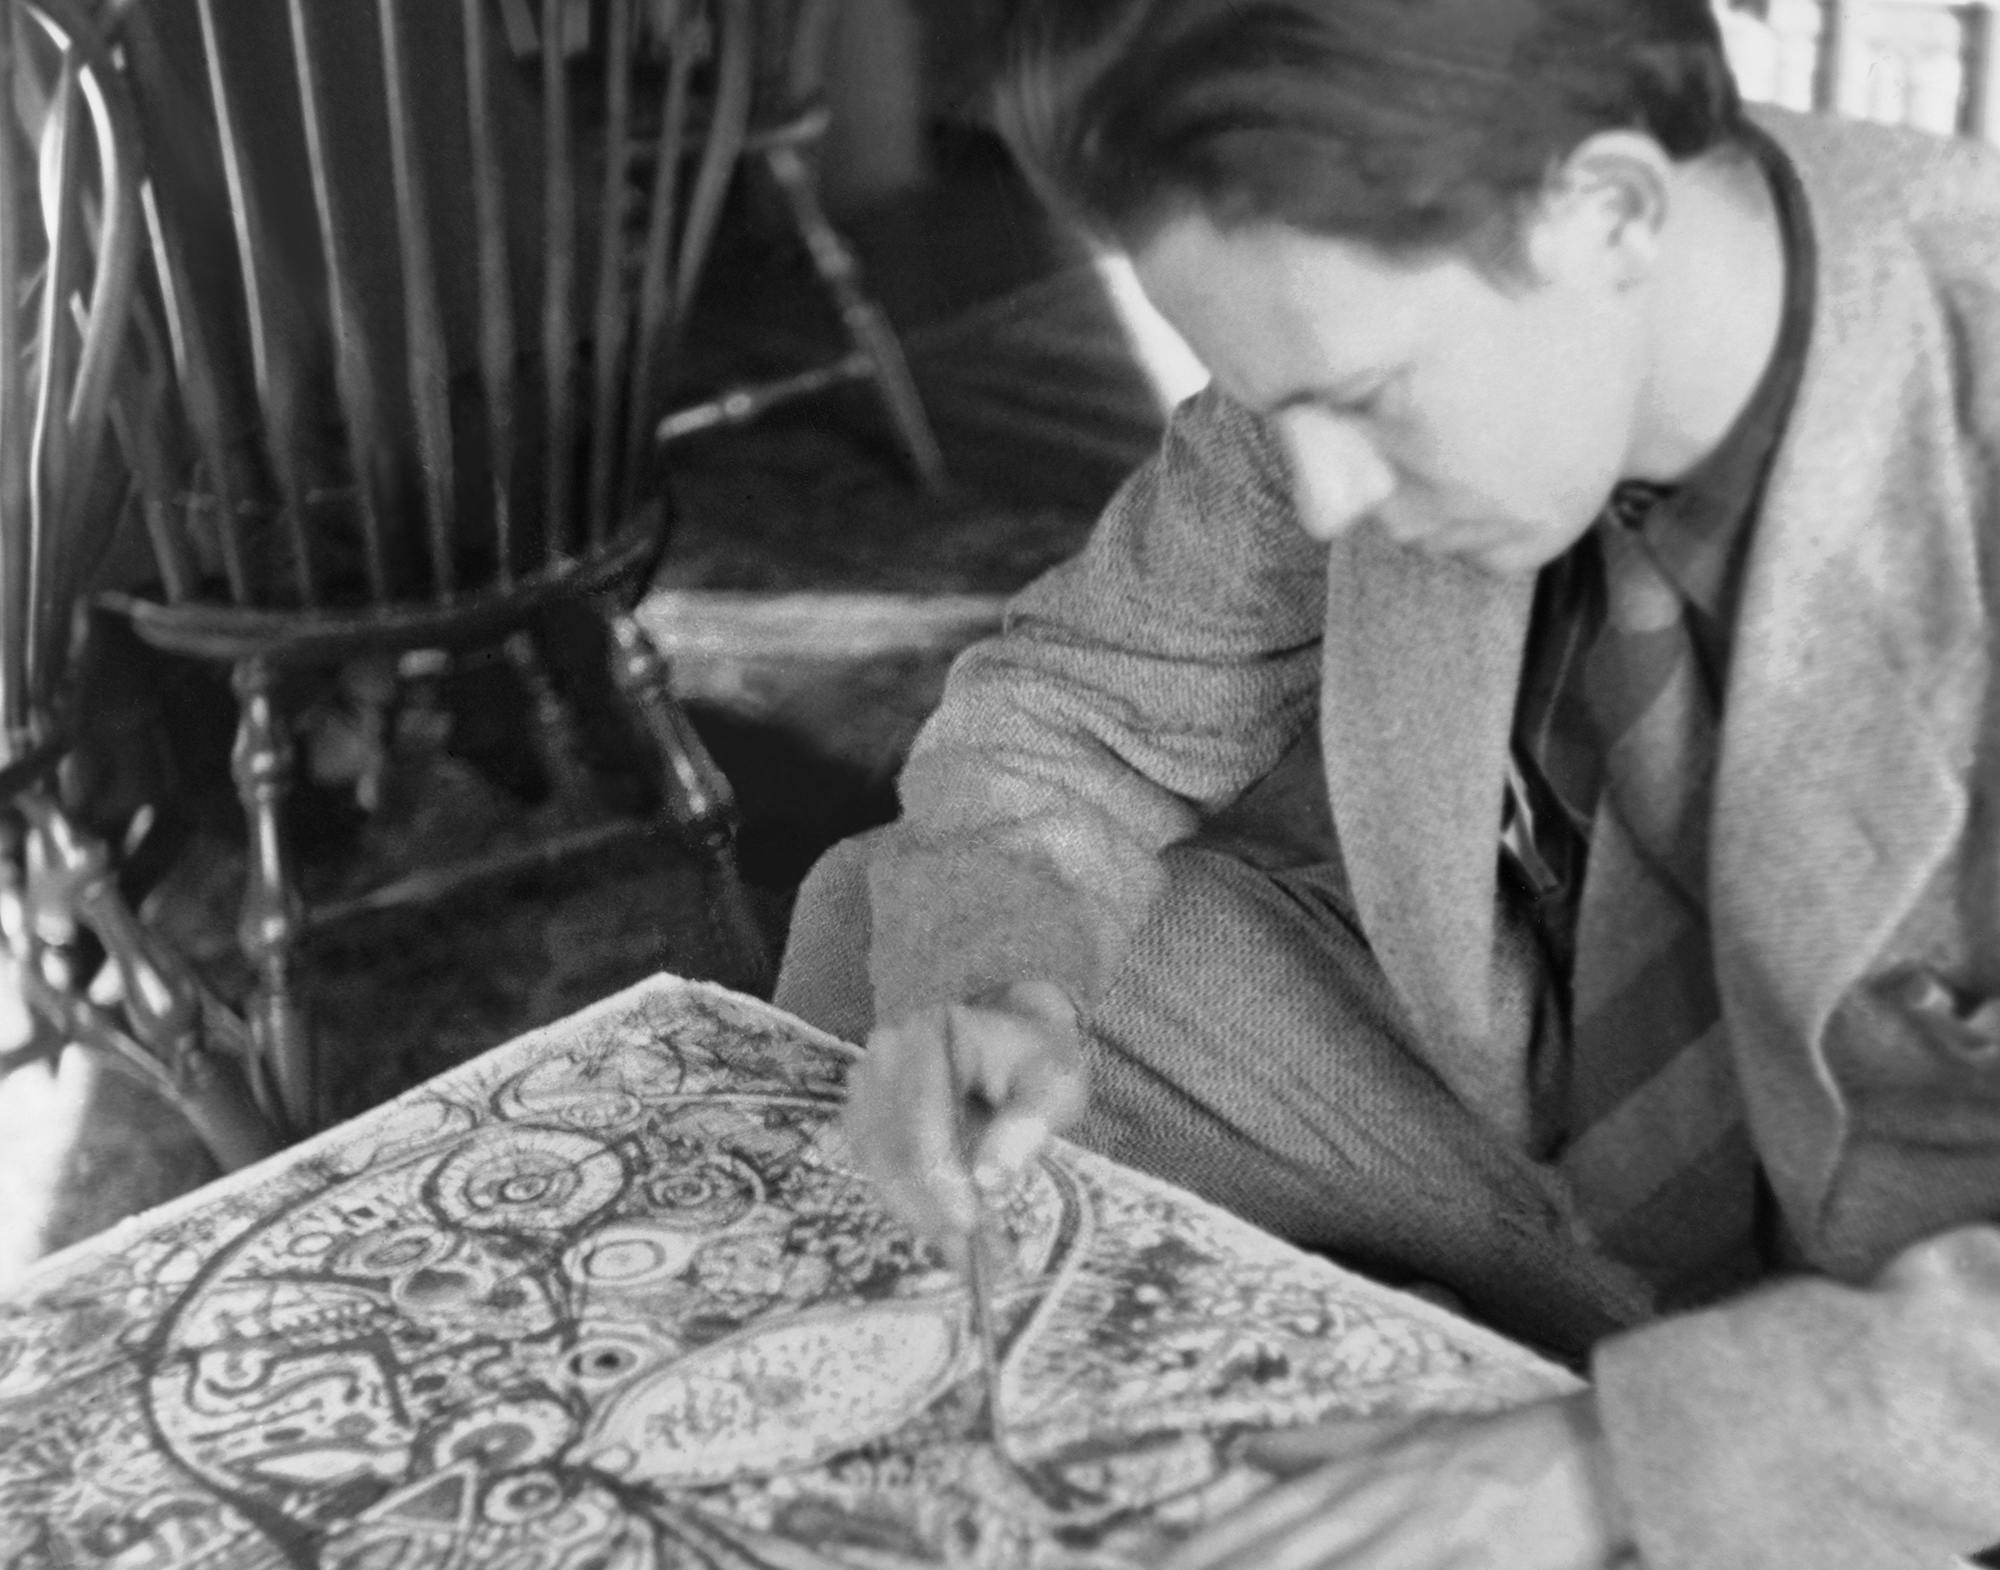 Richard Pousette-Dart working on the watercolor Sea World, c. 1942-43, Photograph by Maggie Meredith. – The Richard Pousette-Dart Foundation